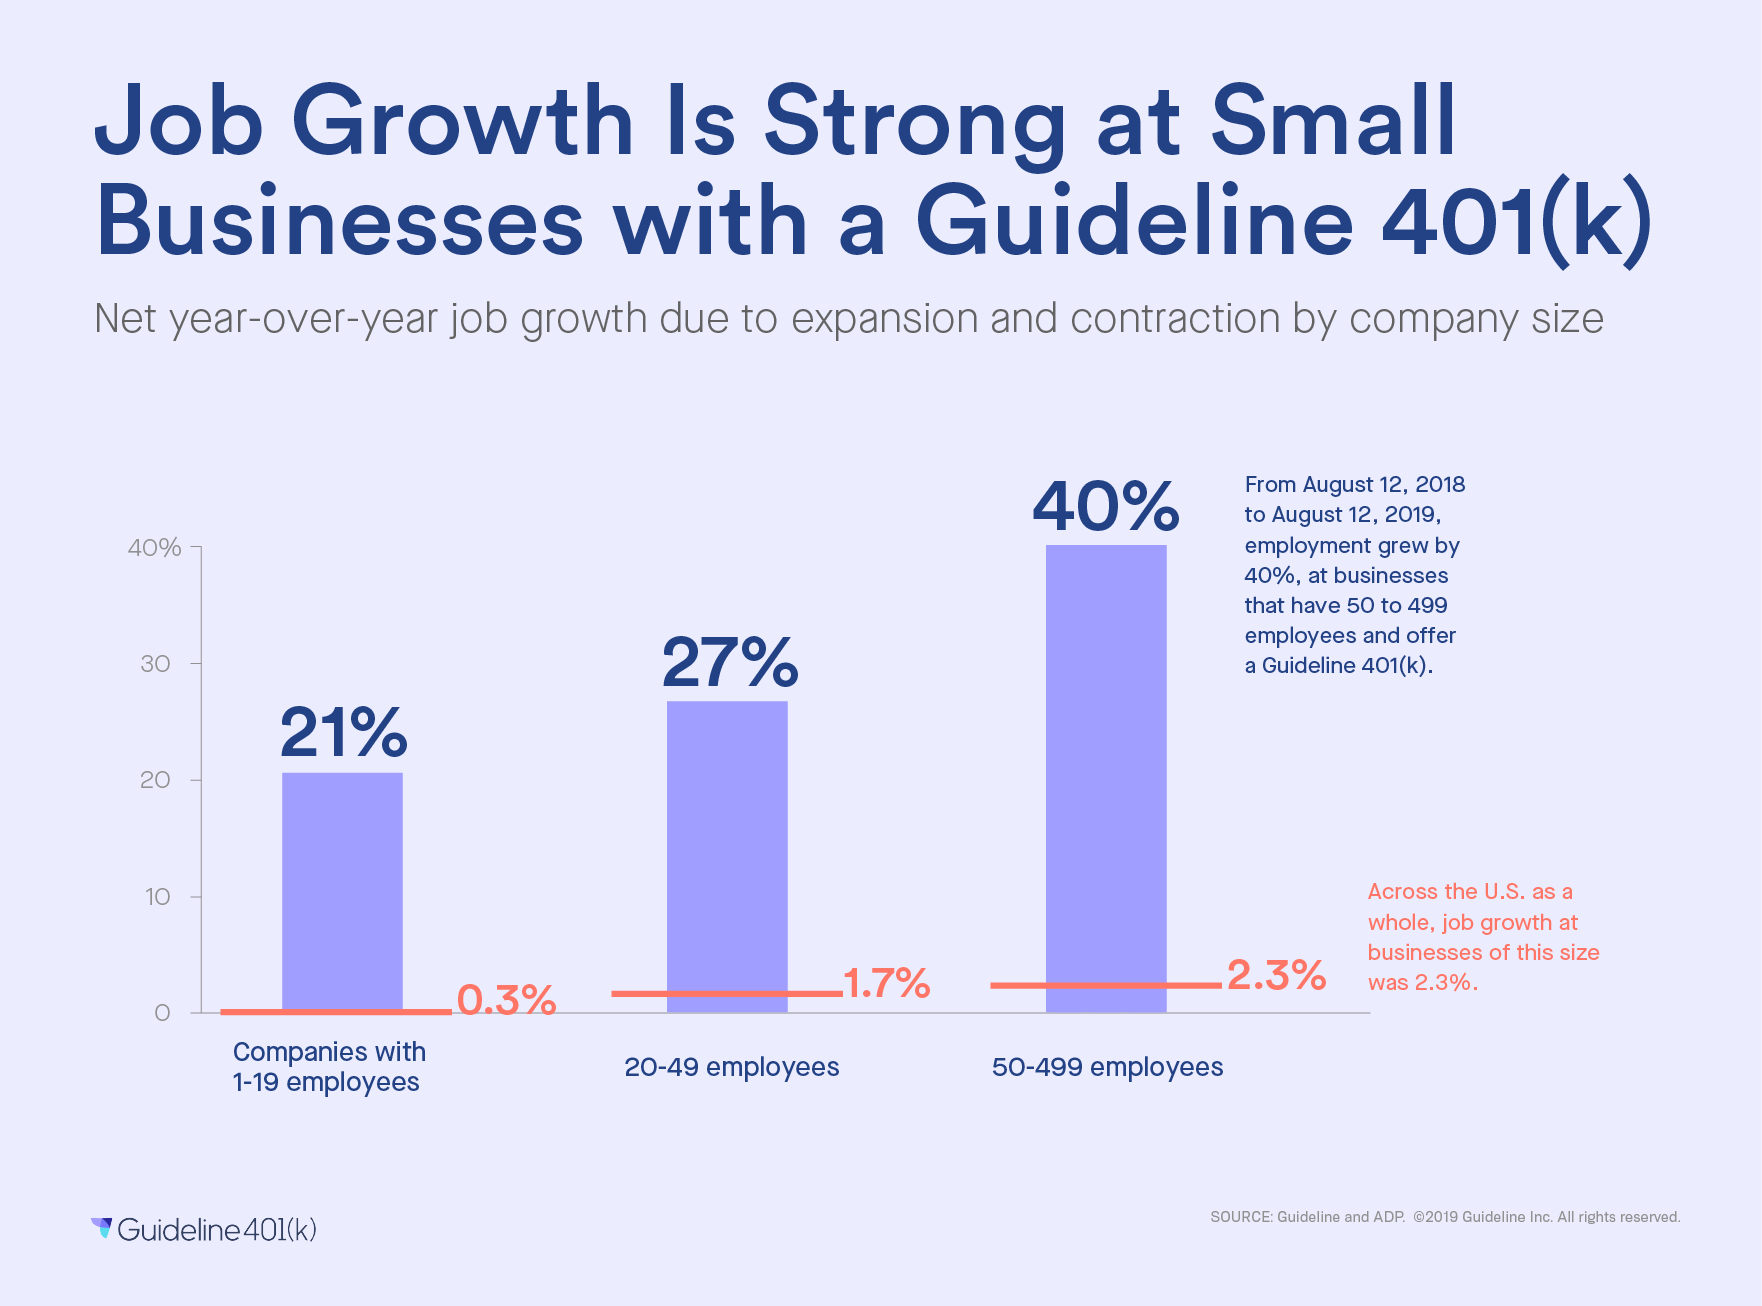 Job Growth is Strong at Small Businesses with a Guideline 401(k)